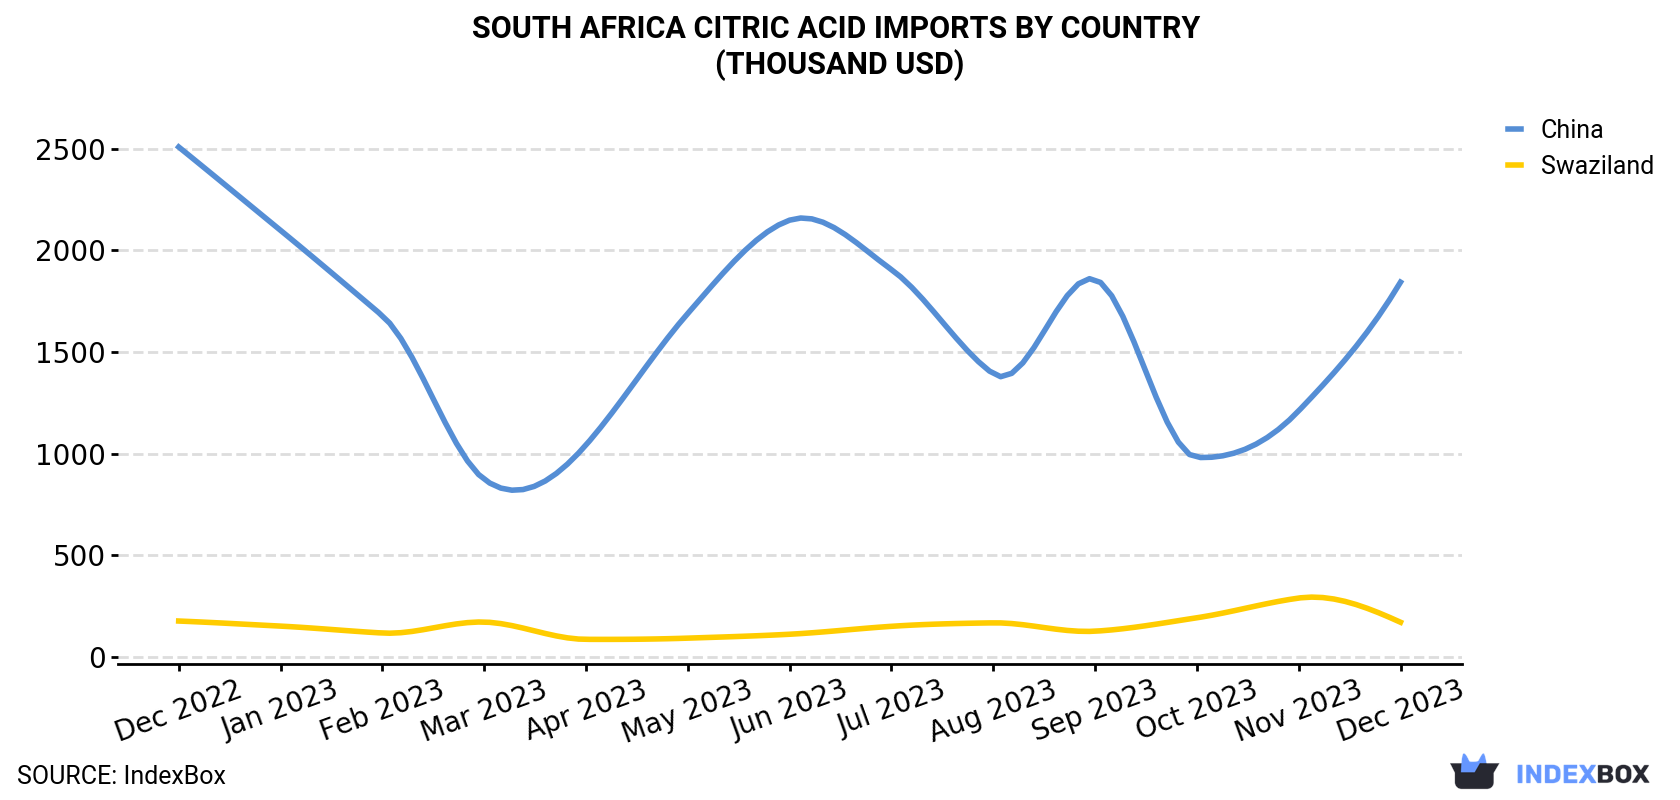 South Africa Citric Acid Imports By Country (Thousand USD)